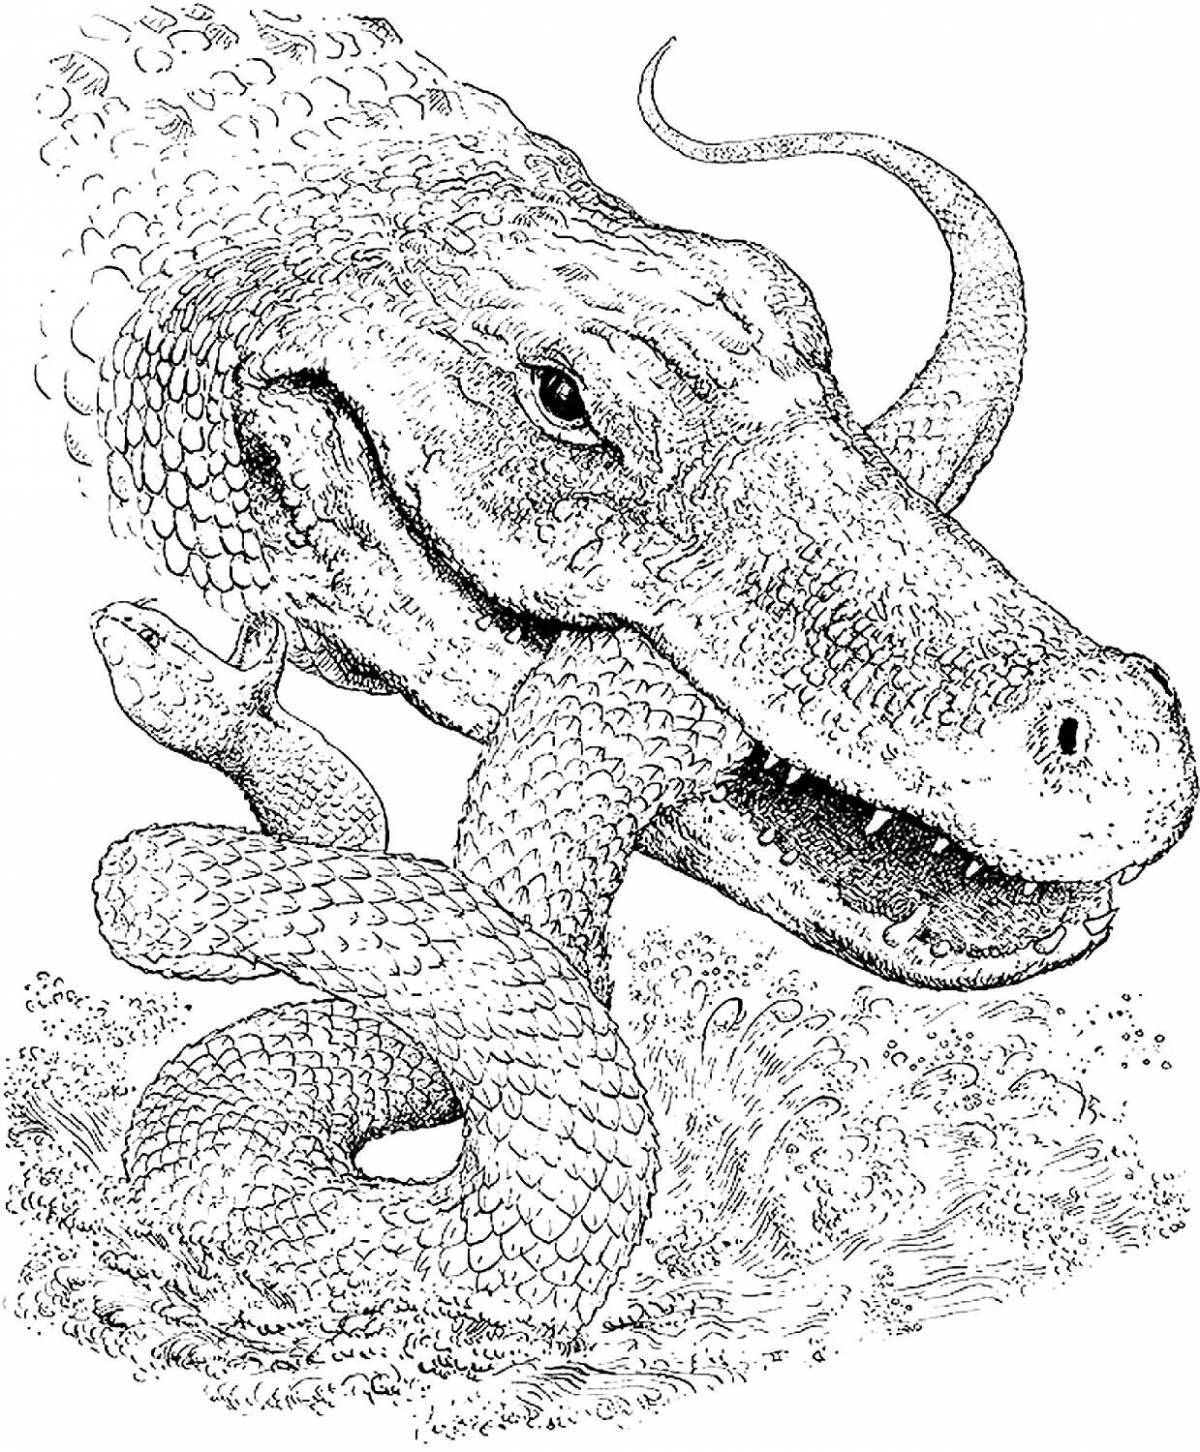 Exquisite reptile coloring pages